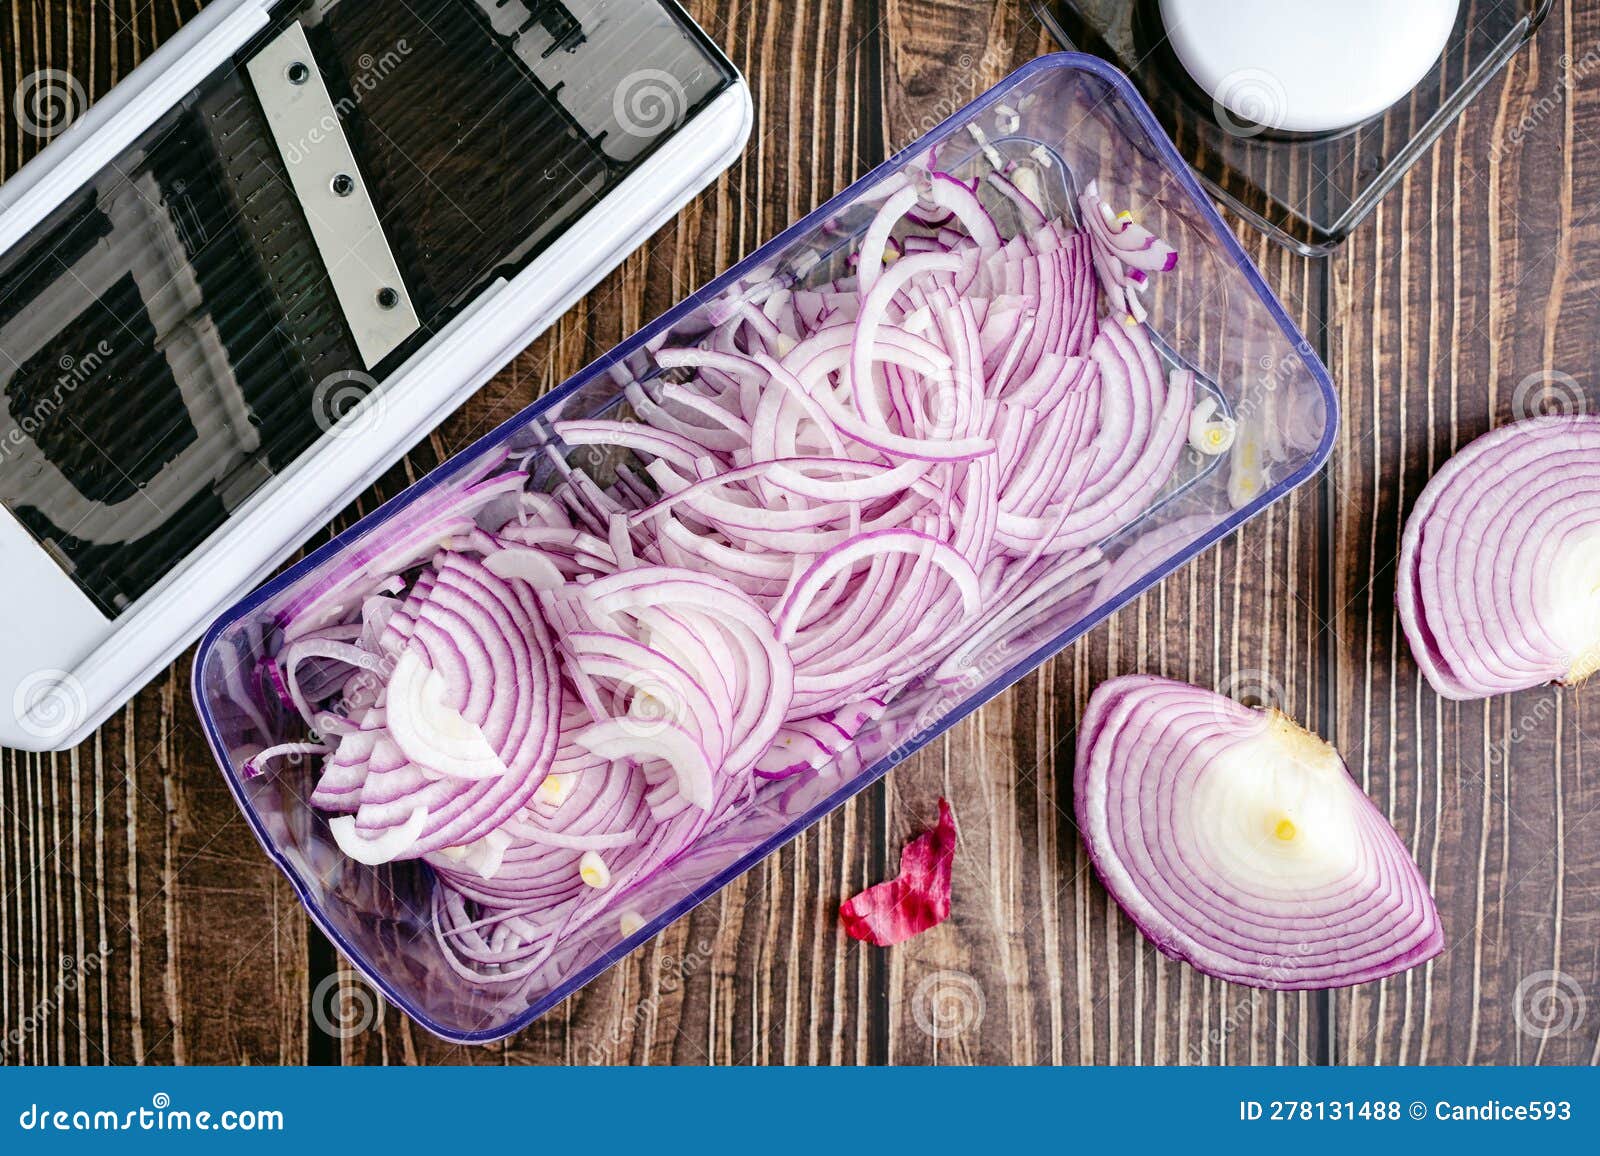 https://thumbs.dreamstime.com/z/red-onions-sliced-thinly-mandoline-onion-viewed-directly-above-278131488.jpg